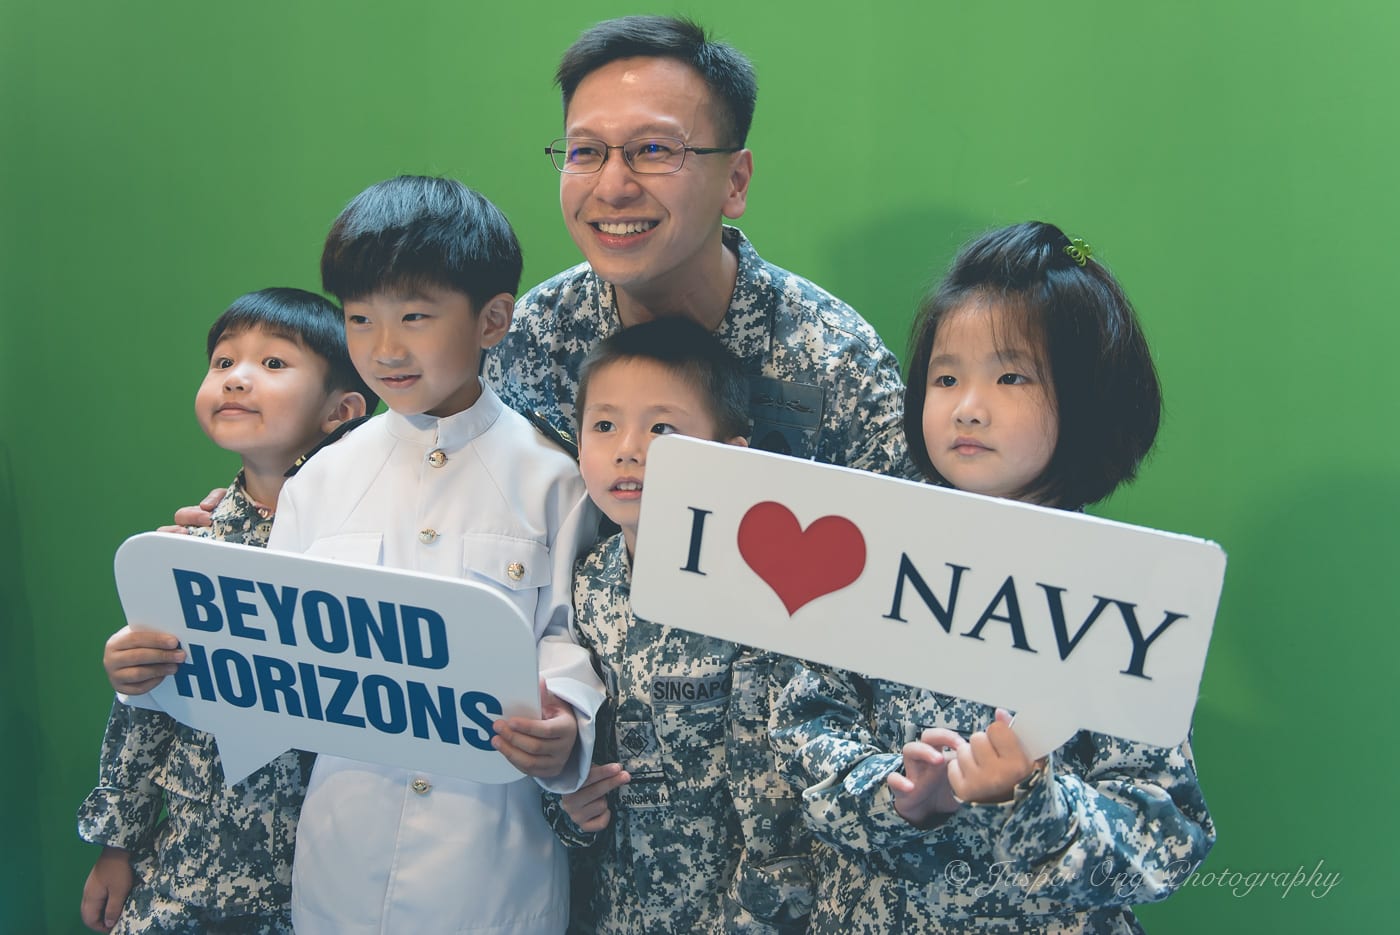 Chief of Navy taking photo with the cute kids at the photo booth